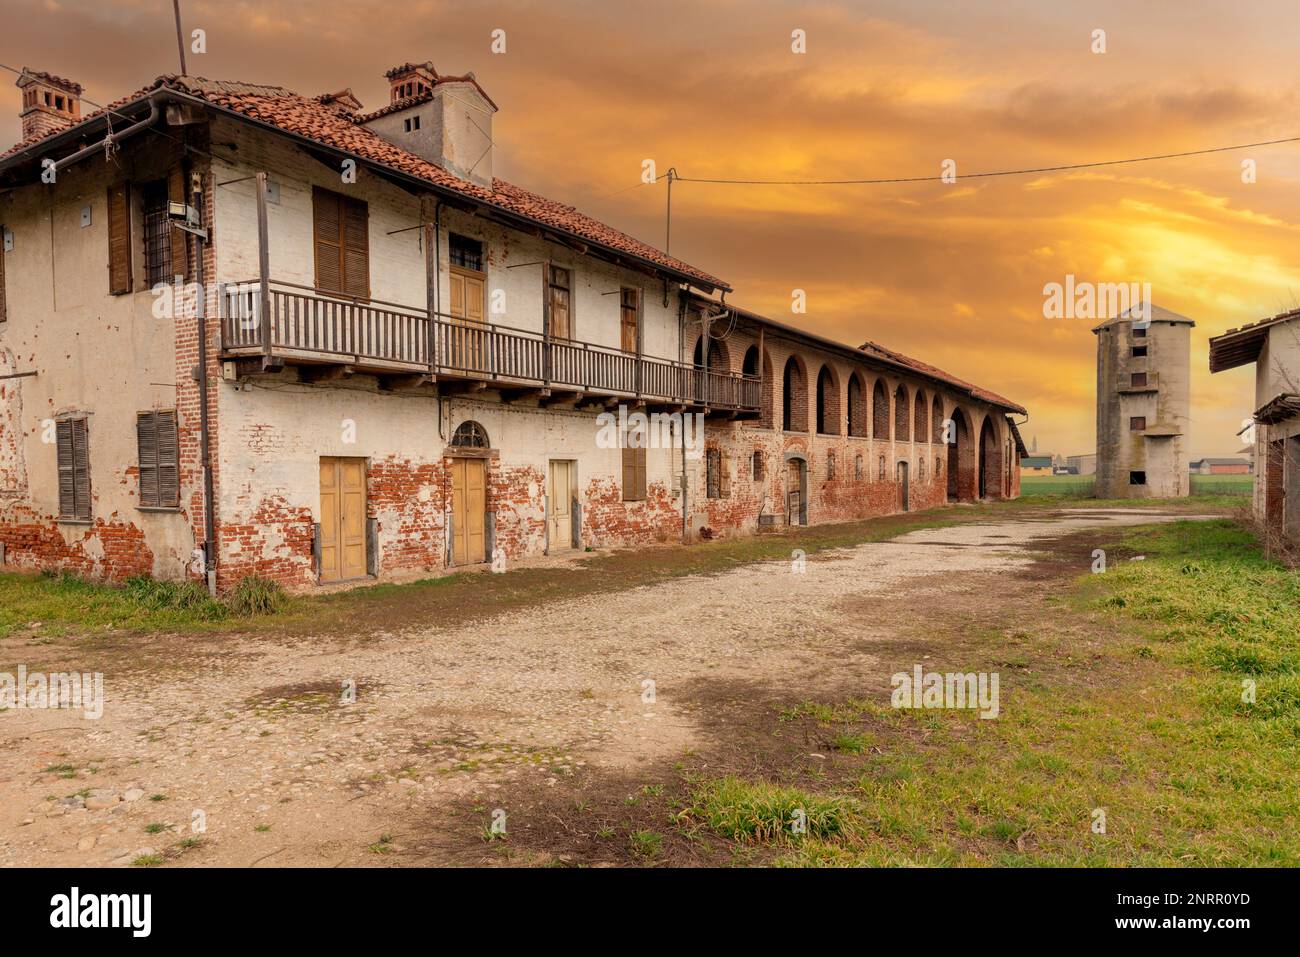 Old abandoned farmhouse with typical rural architecture of the Po Valley in the province of Cuneo, Italy. Rural dwelling with stable and barn under br Stock Photo